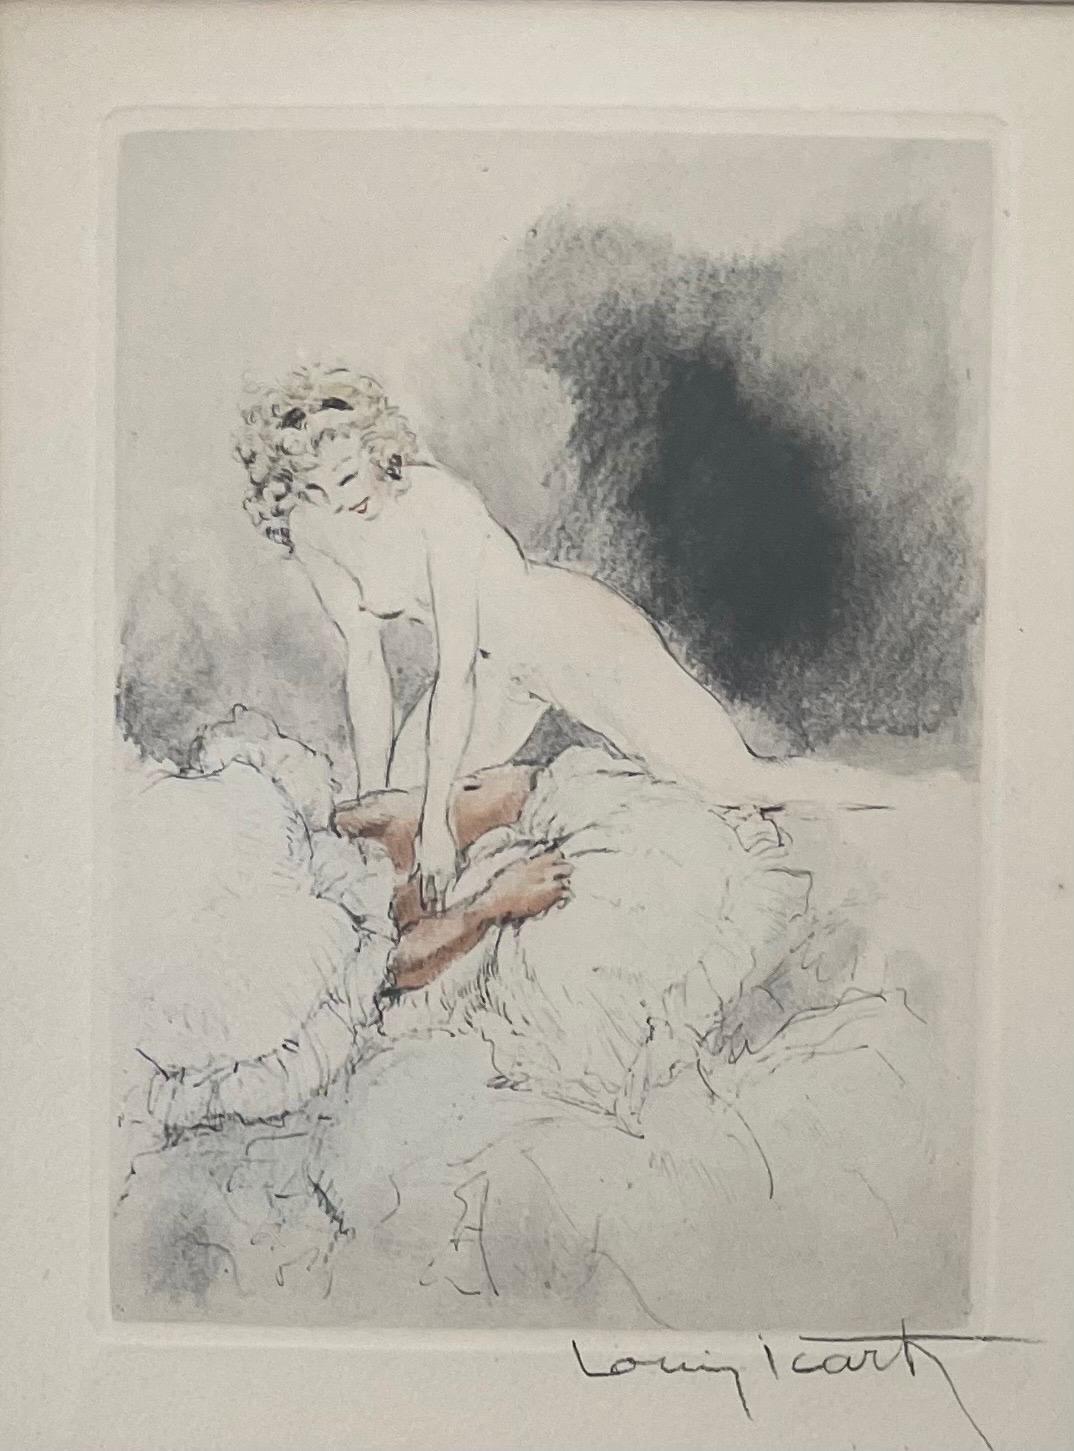 20th Century Erotica Etching by Louis Icart from the 